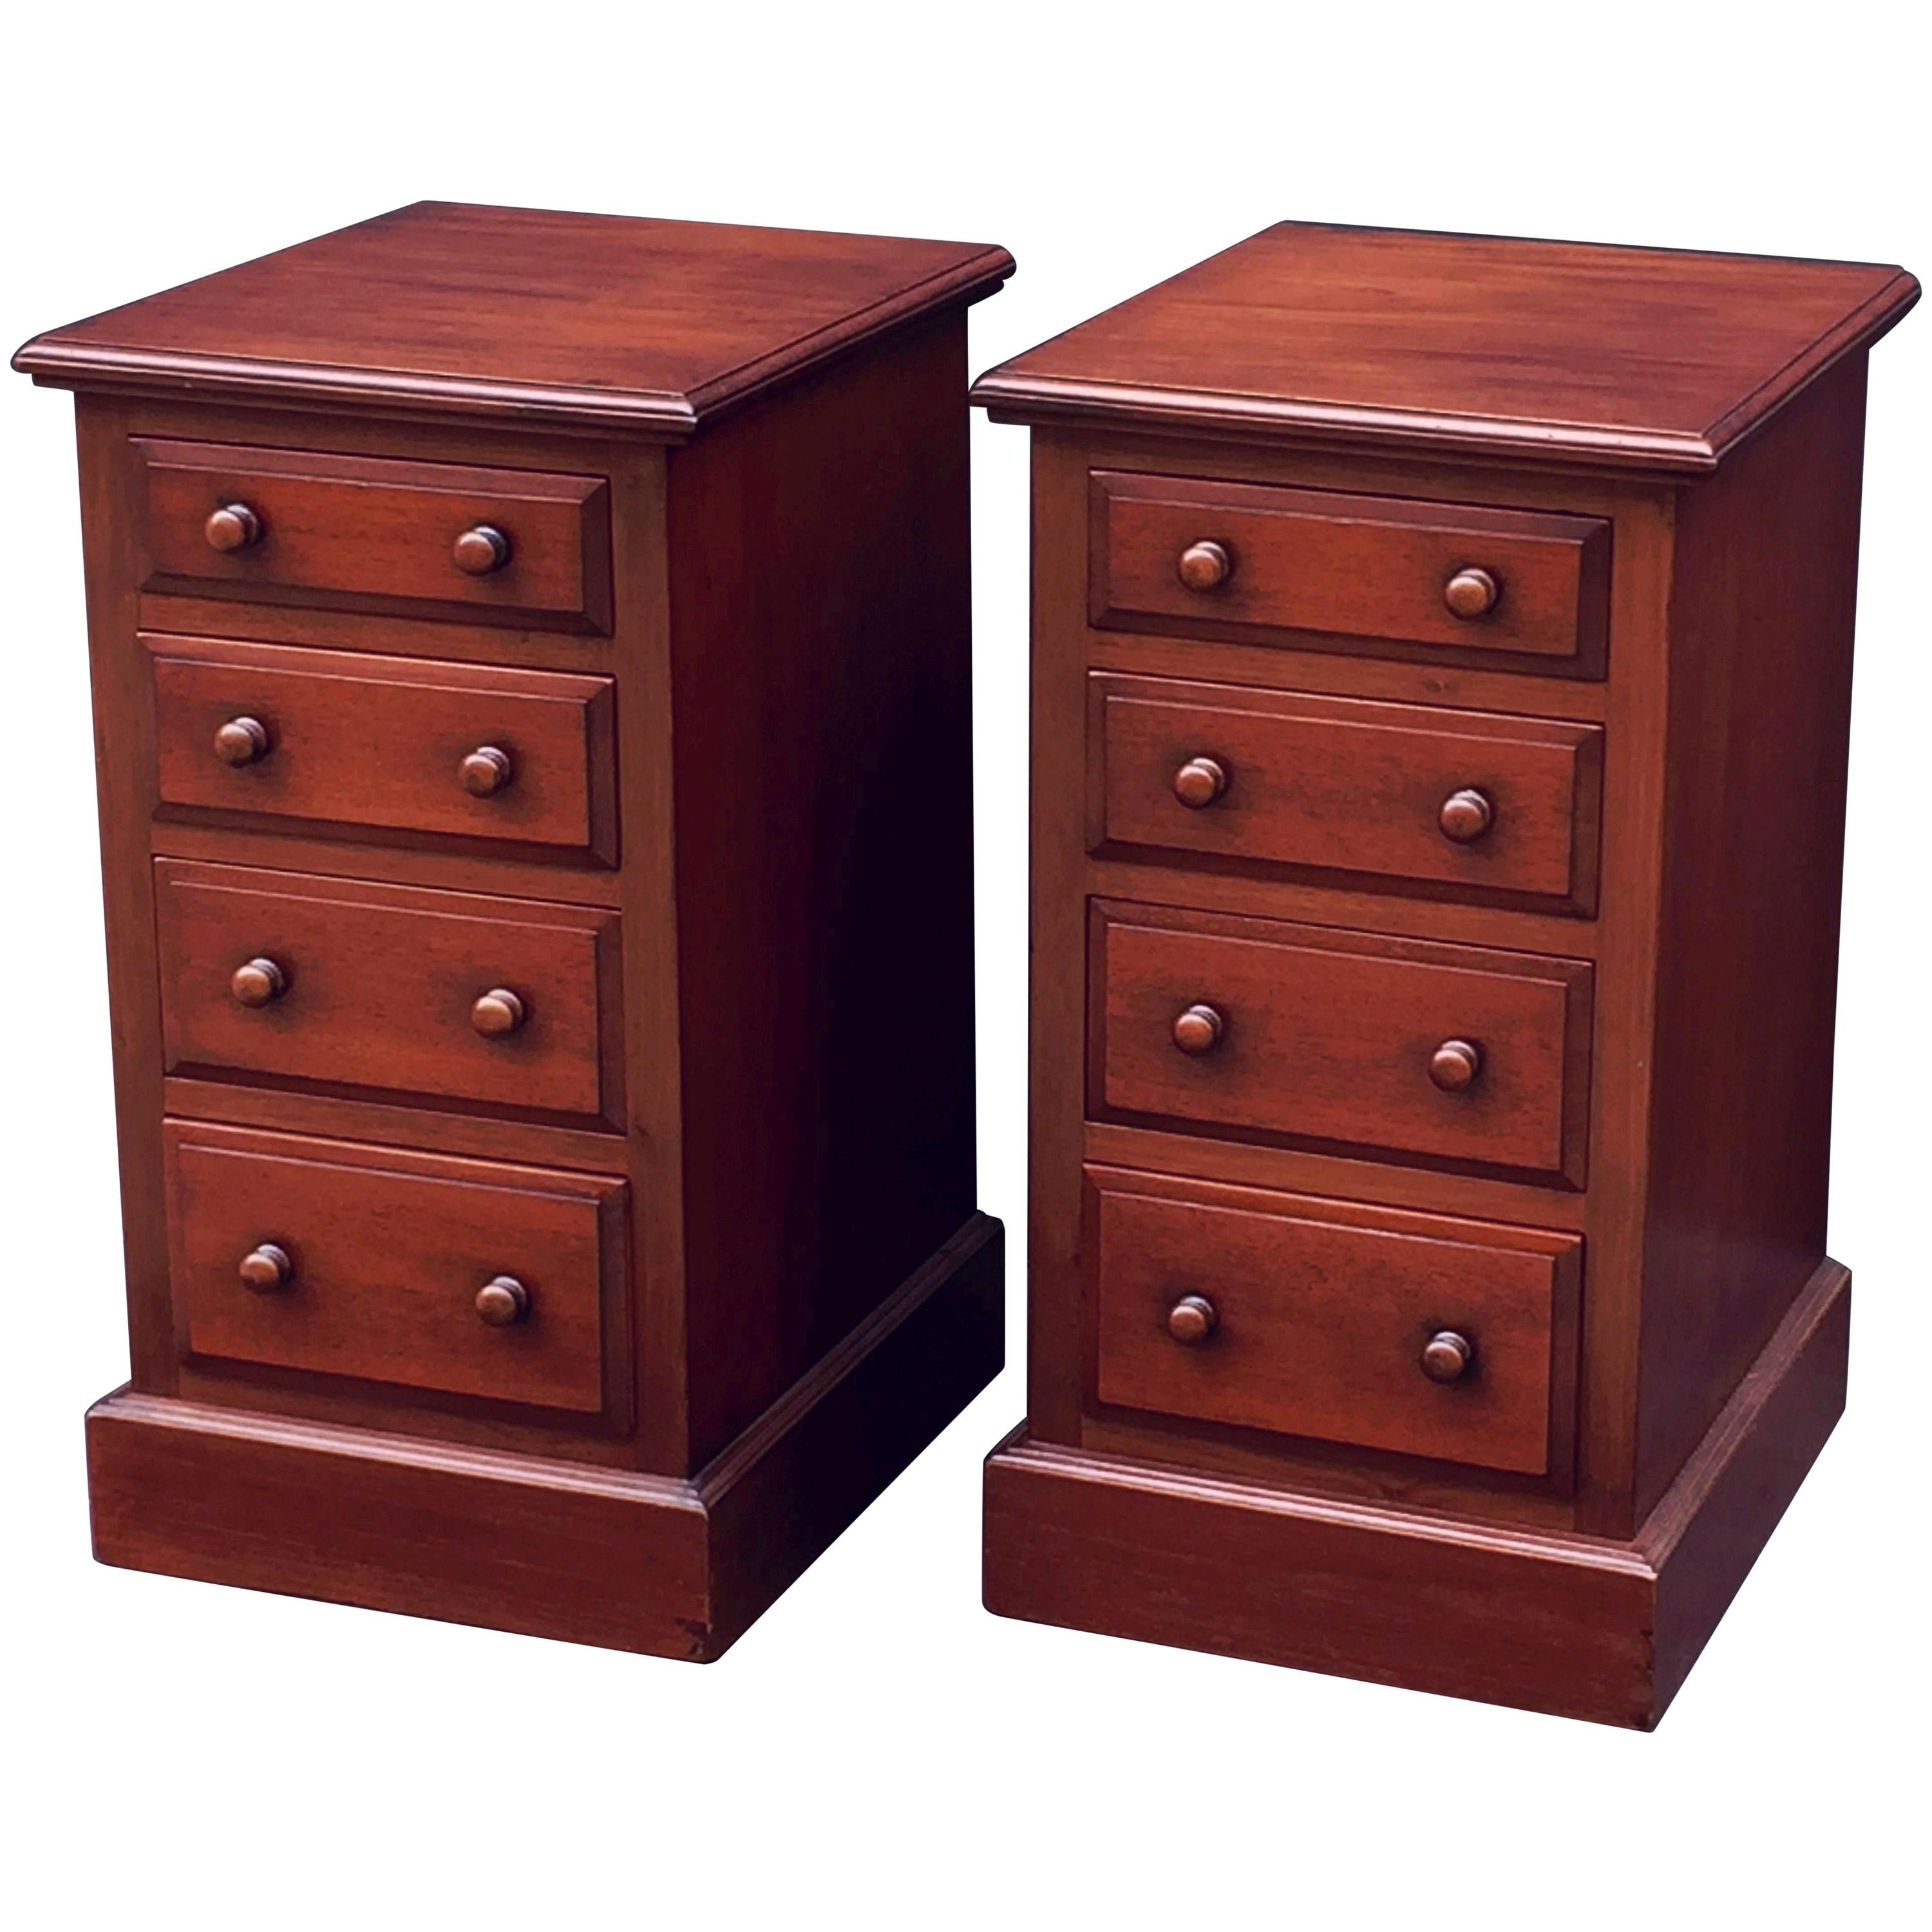 English Bedside Chests or Cabinet Nightstands of Mahogany - 'Priced as a Pair'